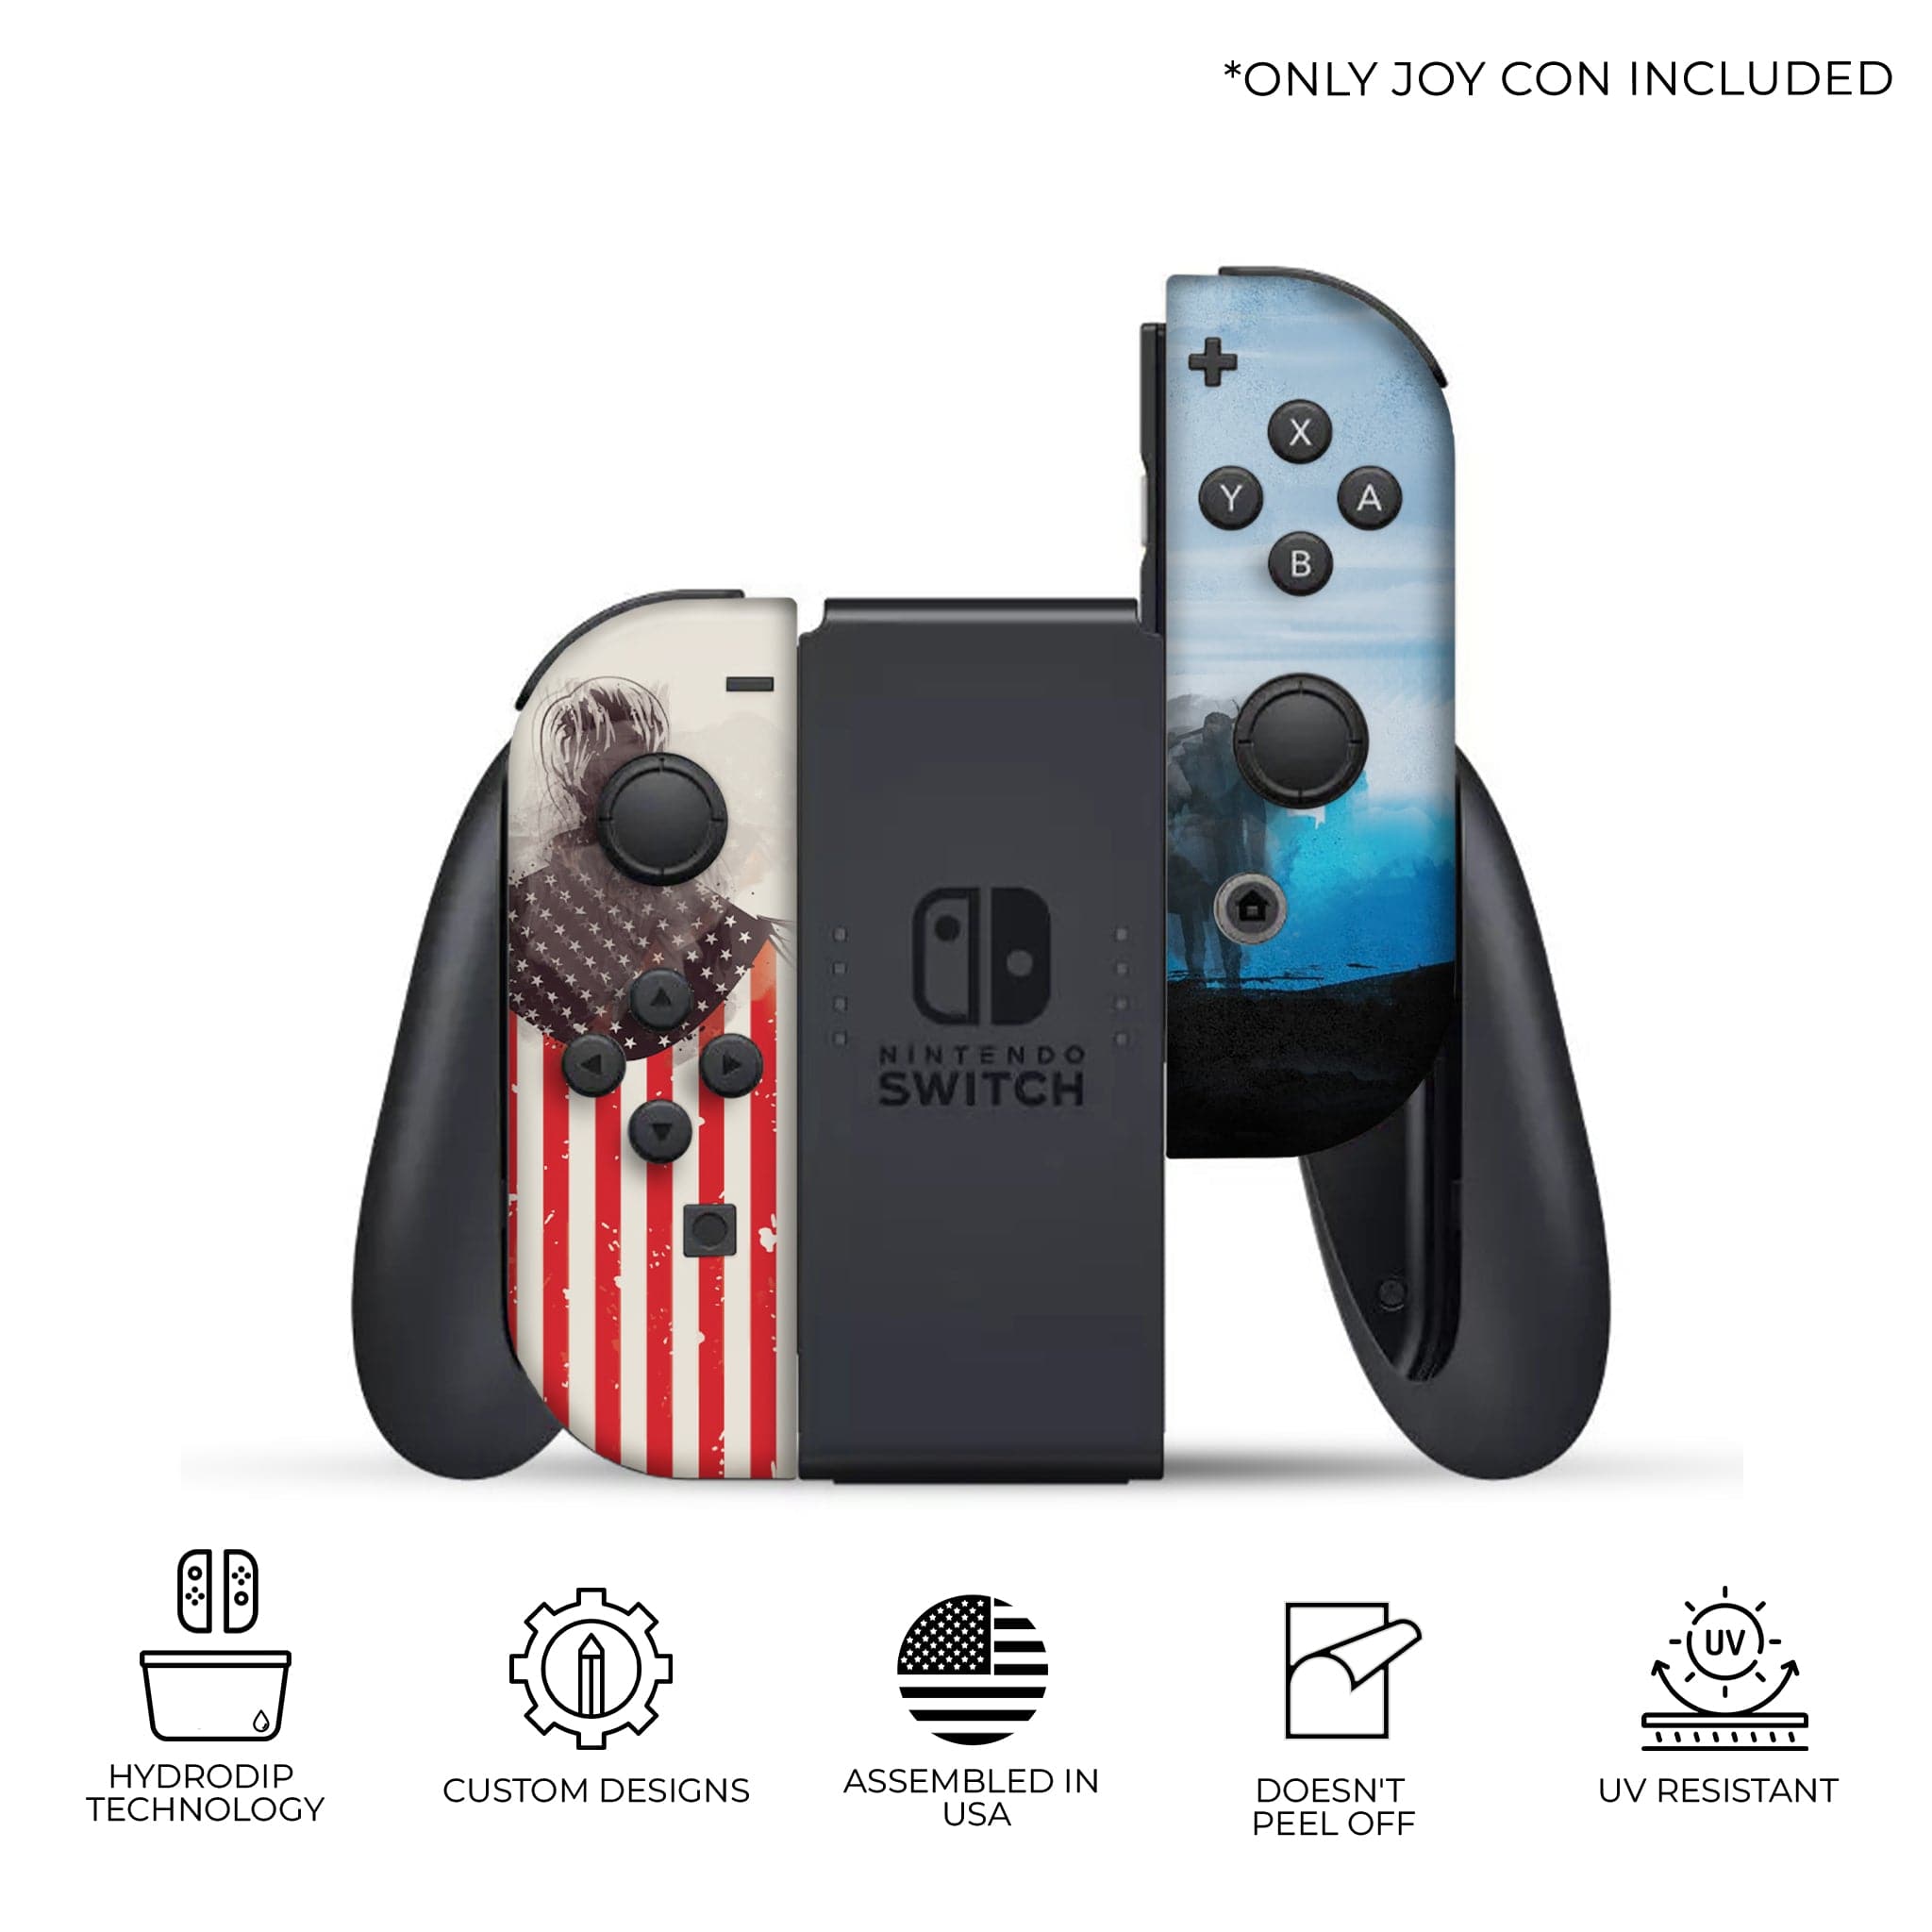 The Boys Nintendo Switch Joy-Con Left and Right Controllers